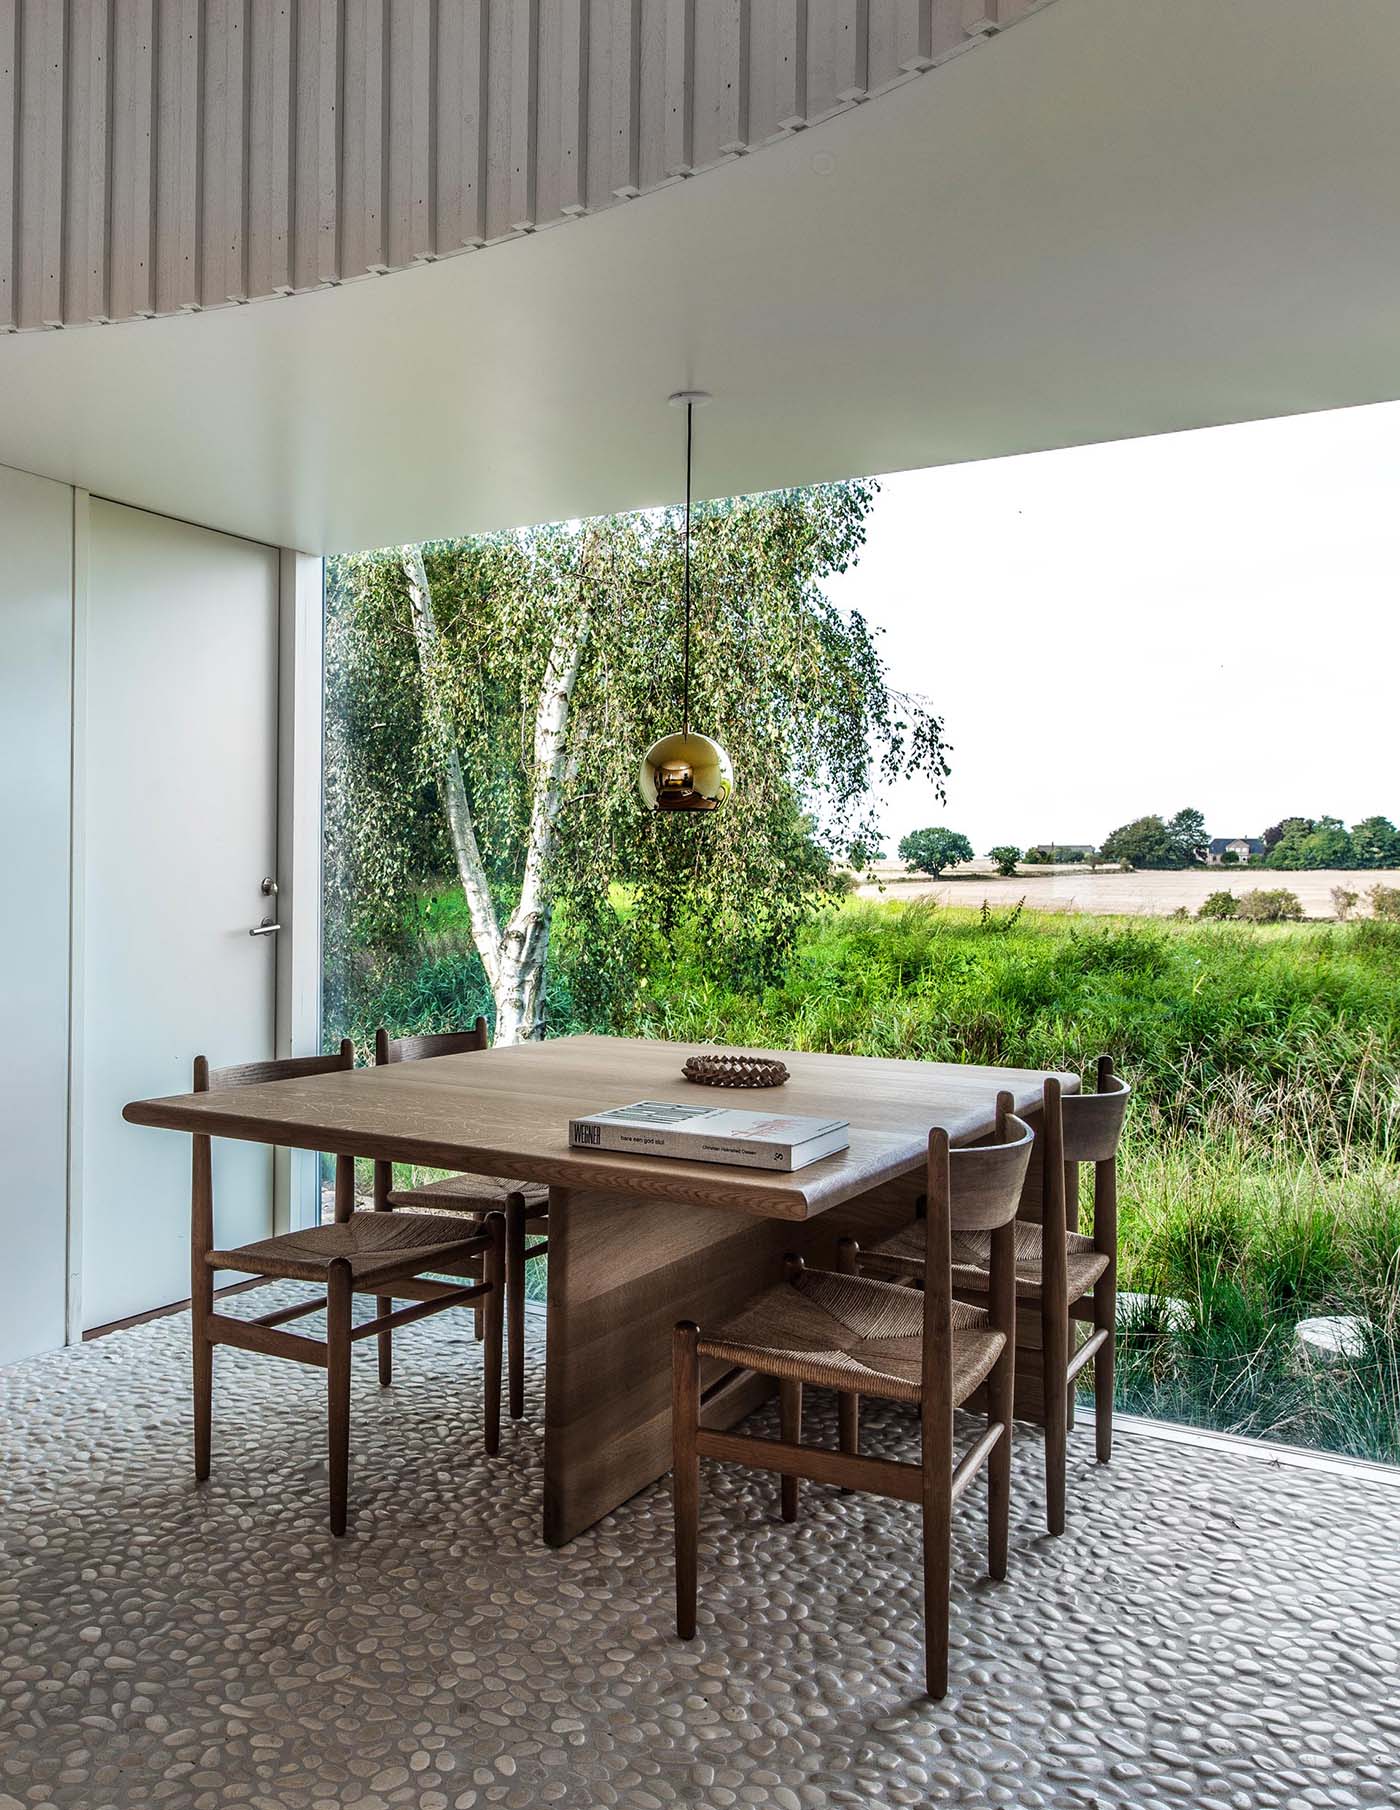 In this modern dining room, the white walls complement the painted board and batten wall cladding, which are included to provide a calm backdrop for the constantly changing textures and colors of the agricultural landscape seen through the window.